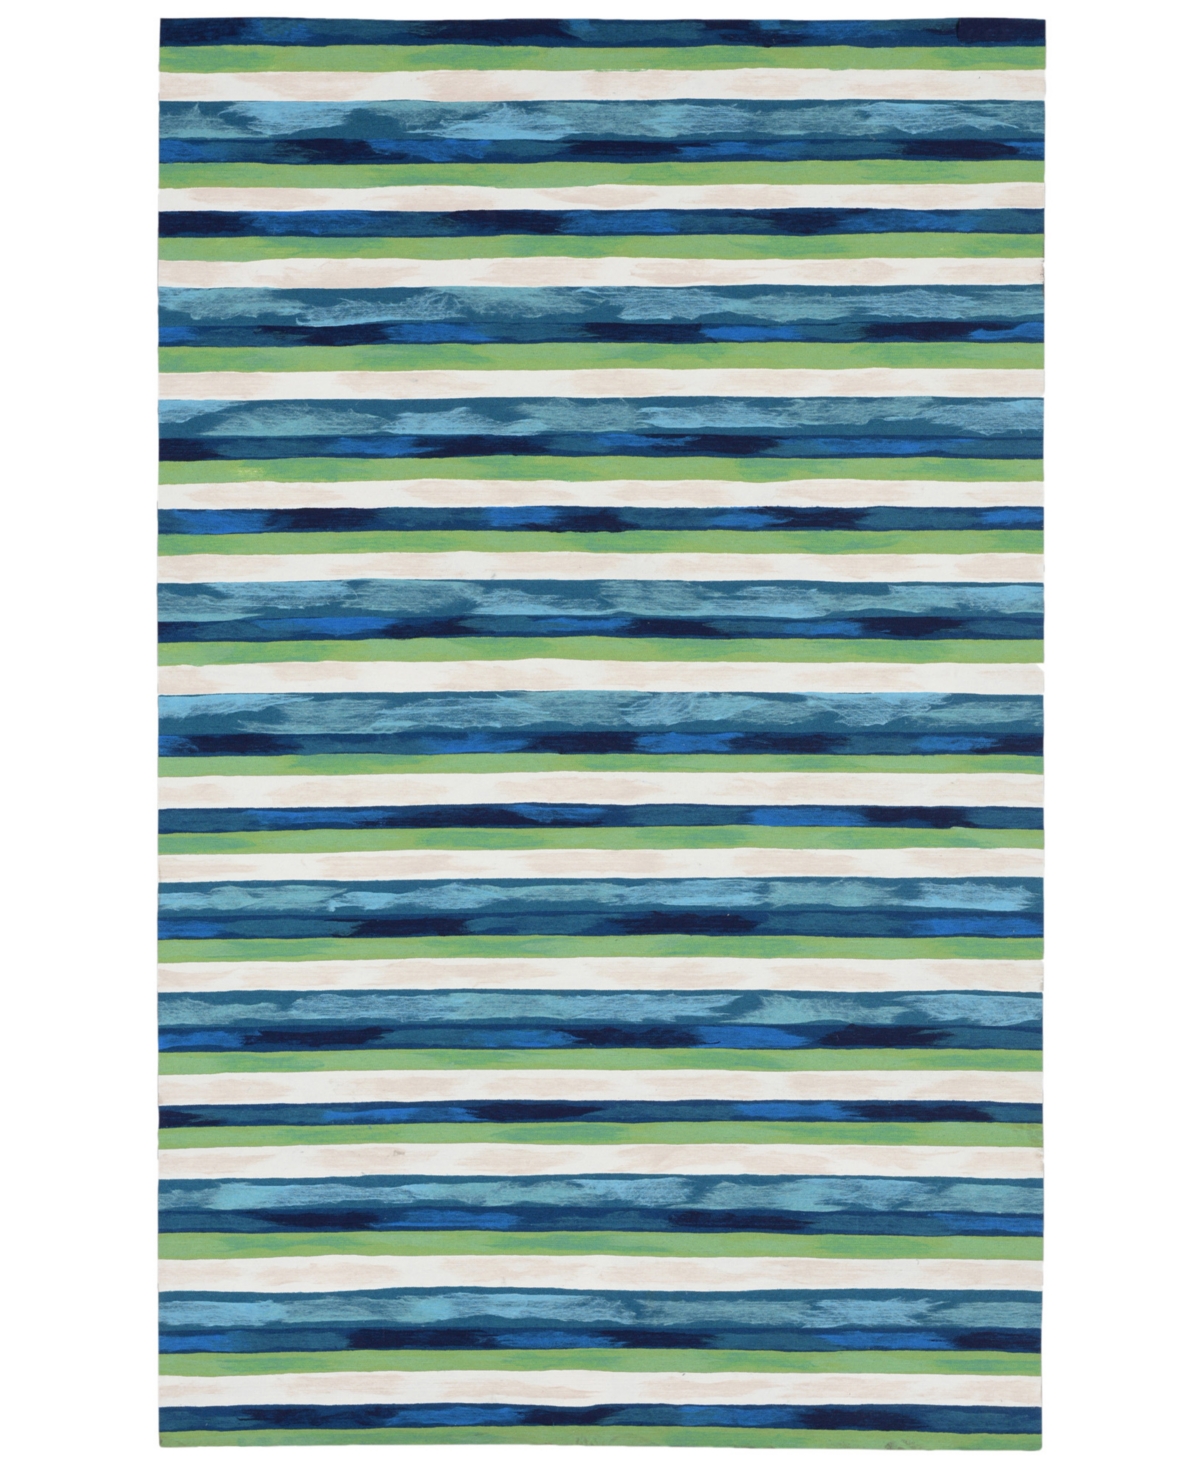 LIORA MANNE VISIONS II PAINTED STRIPES 5' X 8' OUTDOOR AREA RUG